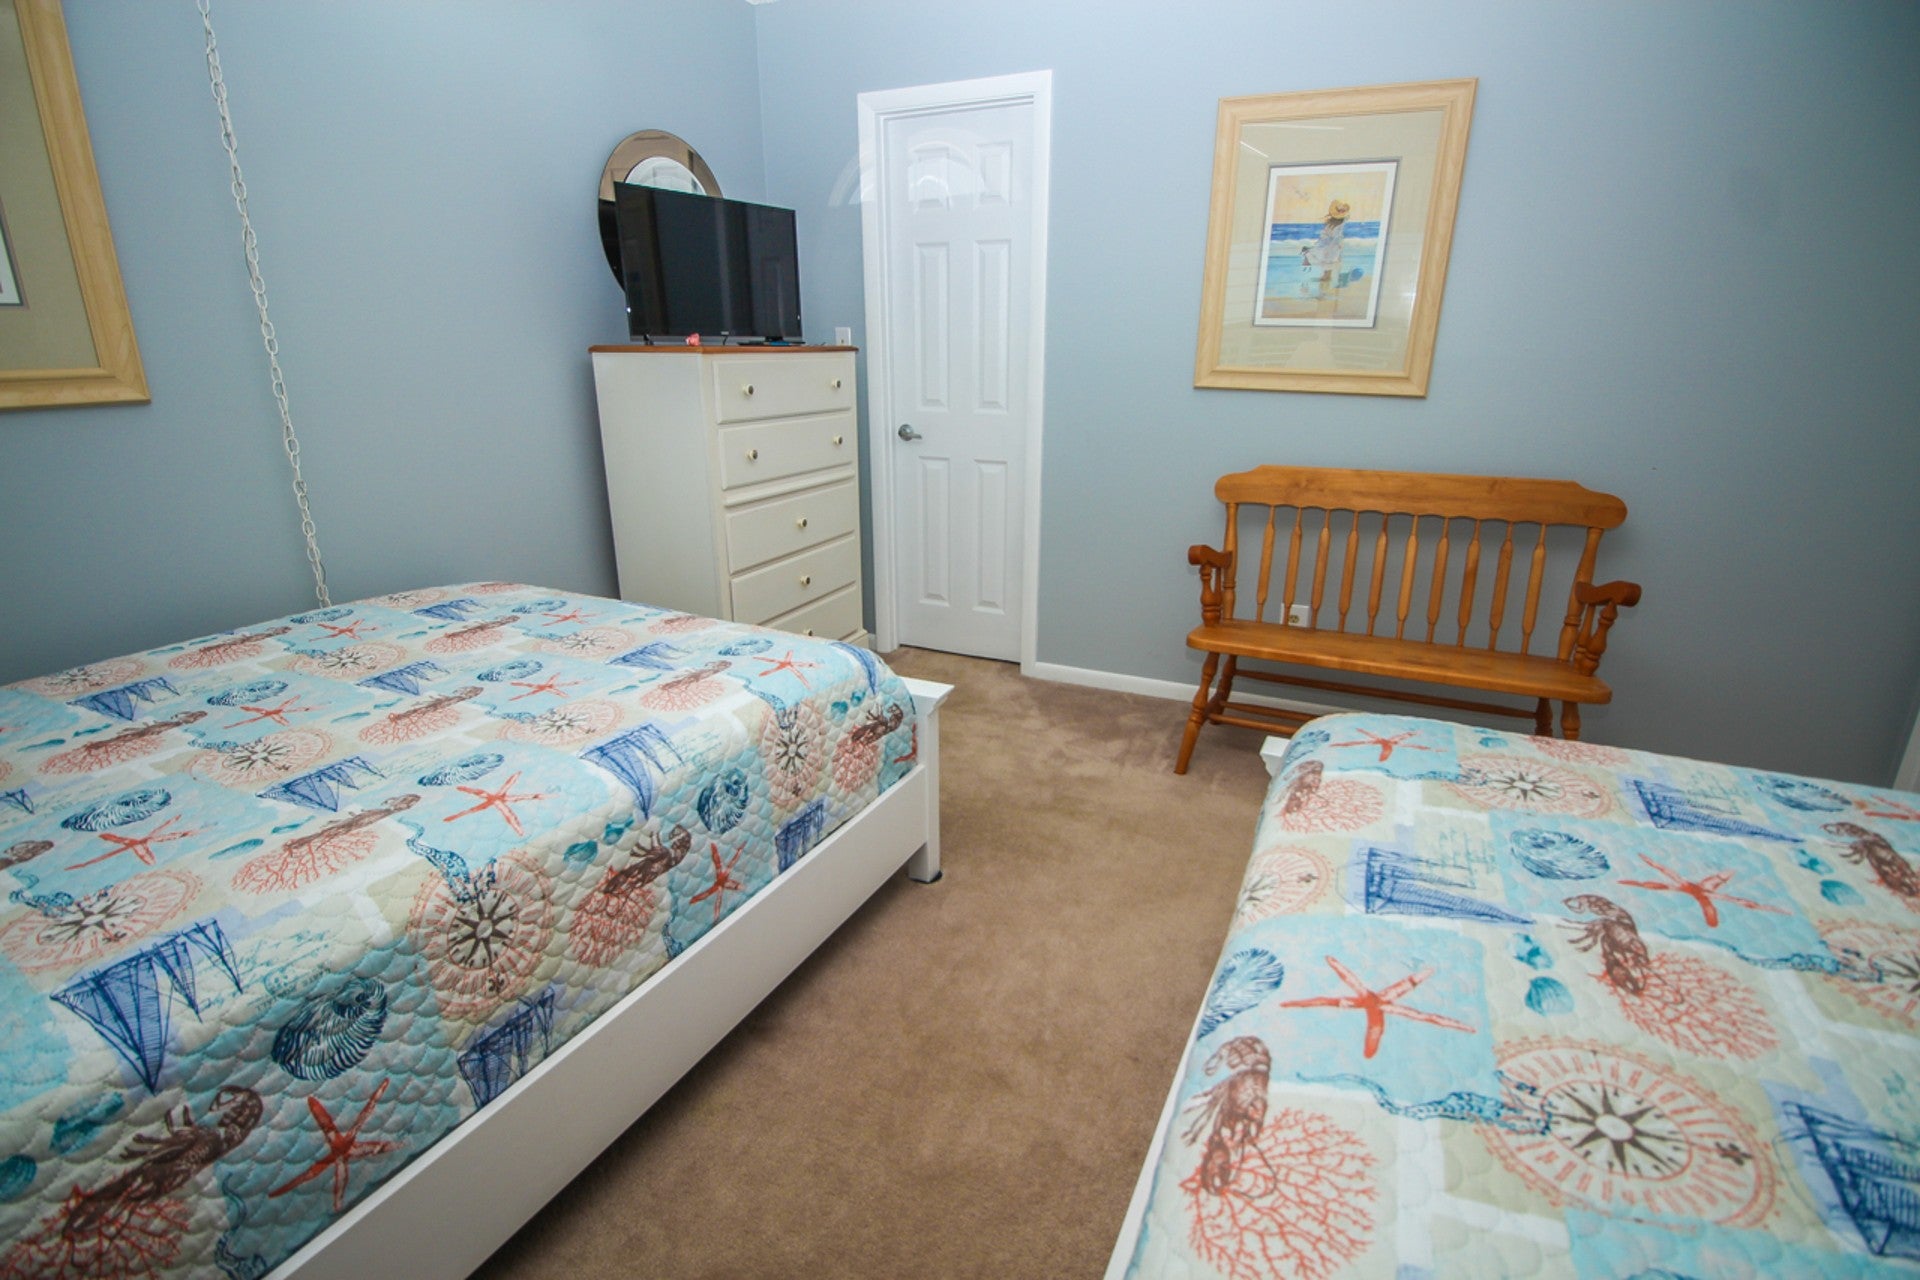 Additional Seating in Second Bedroom